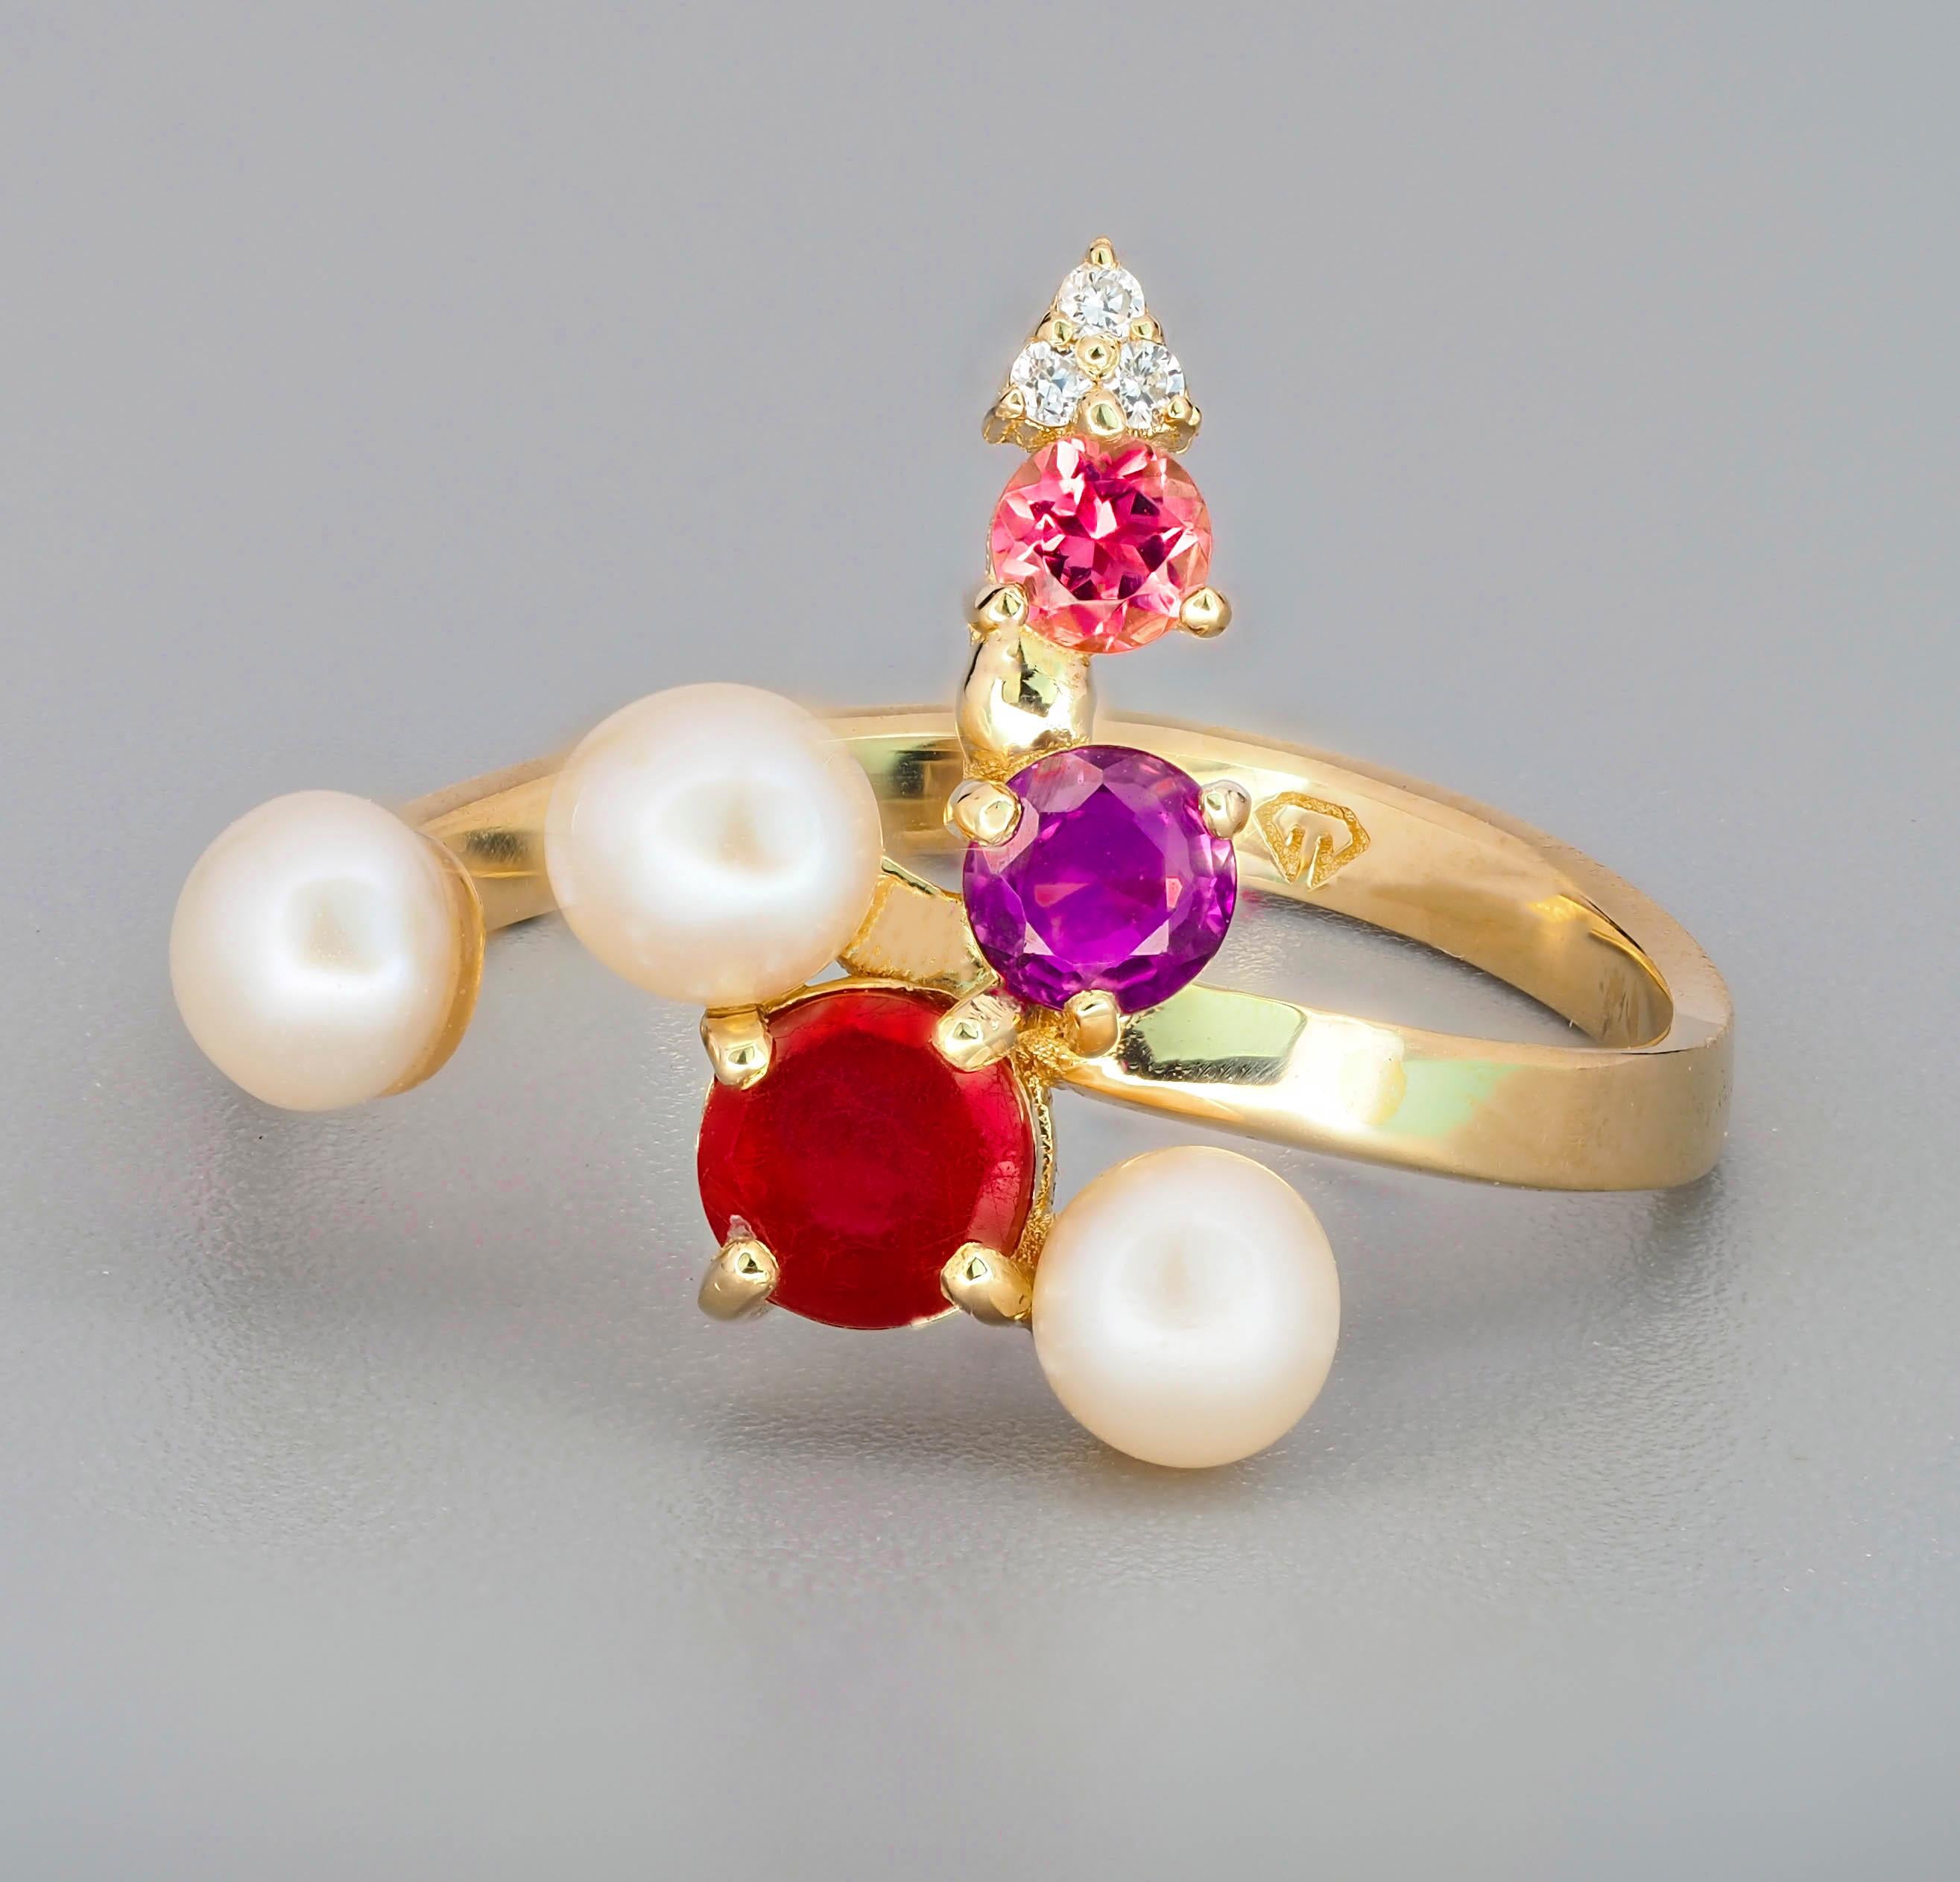 For Sale:   Ruby and multicolored gemstones ring in 14k gold! 5